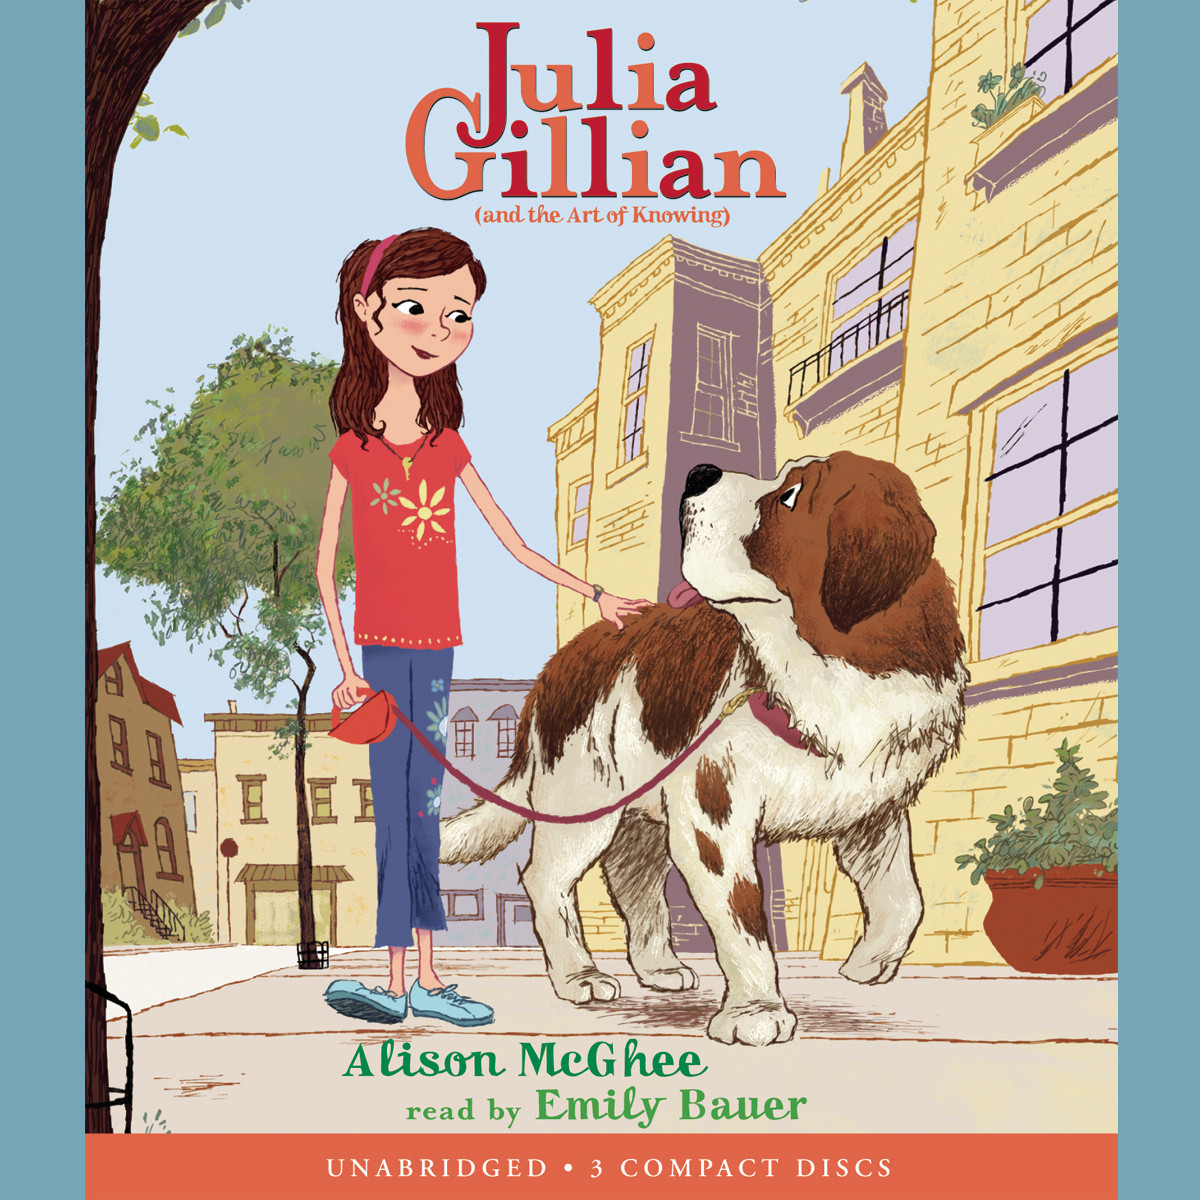 Julia Gillian (and the Art of Knowing) Audiobook, by Alison McGhee